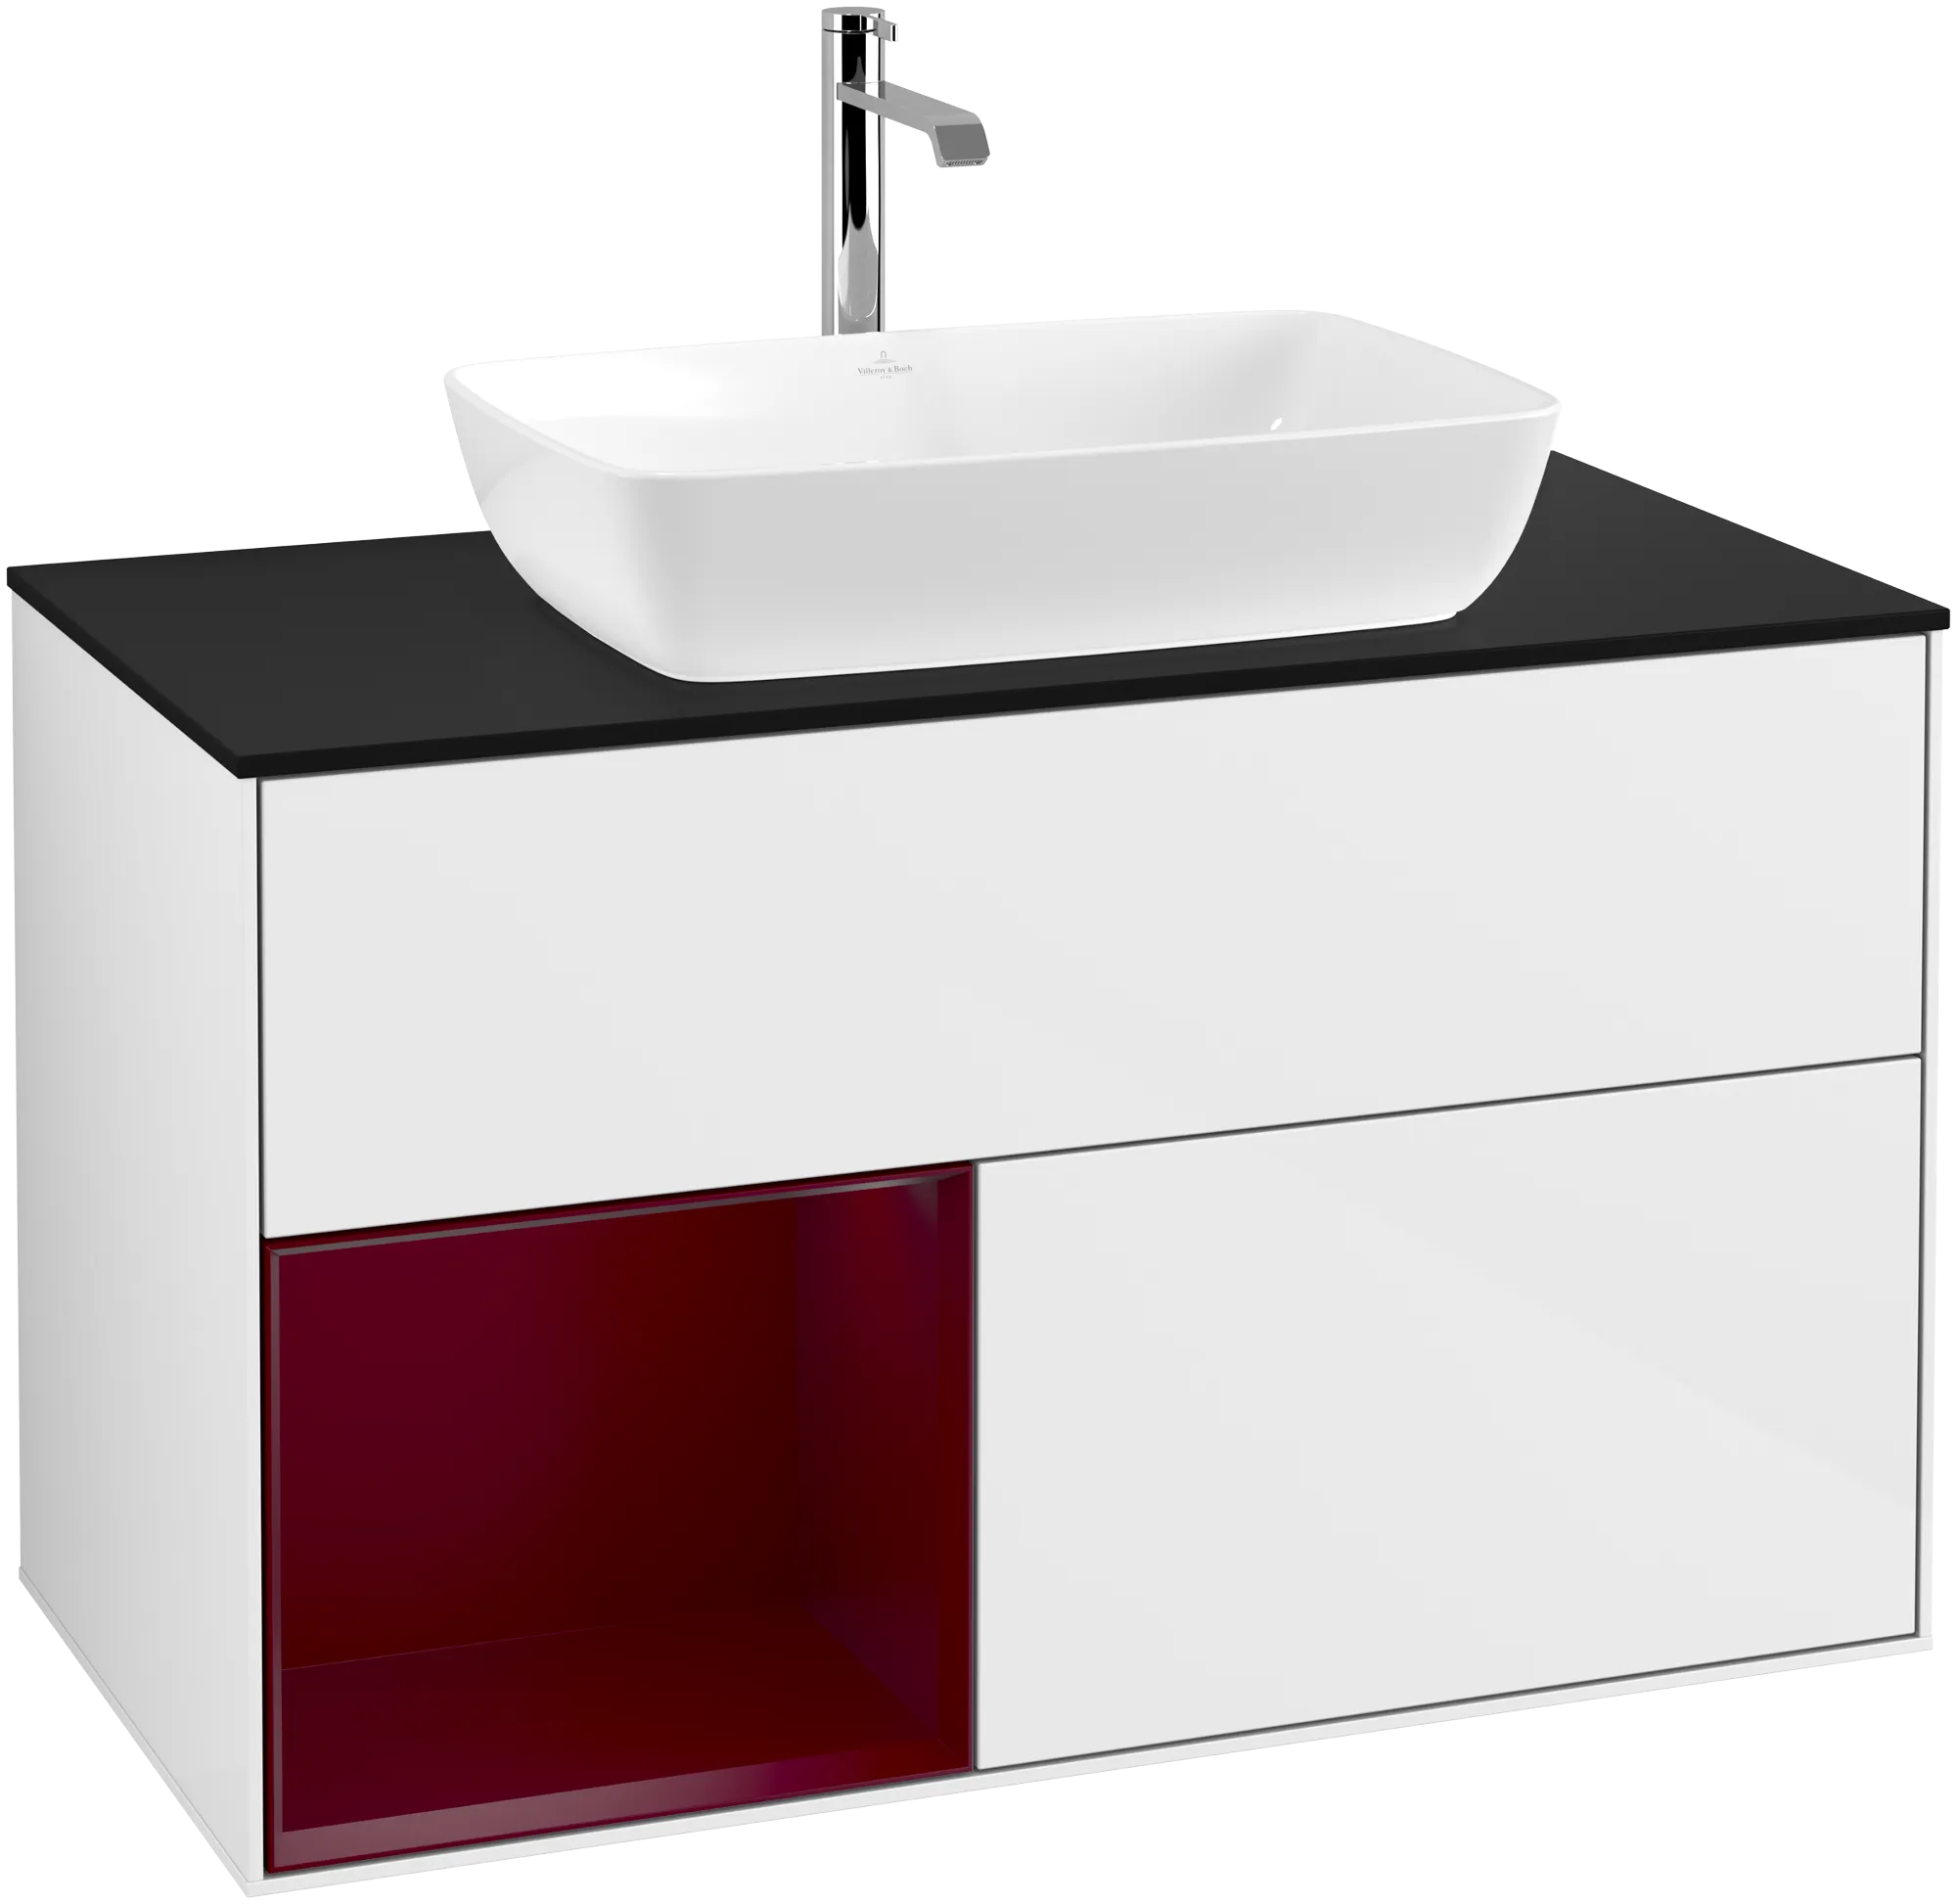 Picture of VILLEROY BOCH Finion Vanity unit, with lighting, 2 pull-out compartments, 1000 x 603 x 501 mm, Glossy White Lacquer / Peony Matt Lacquer / Glass Black Matt #G772HBGF